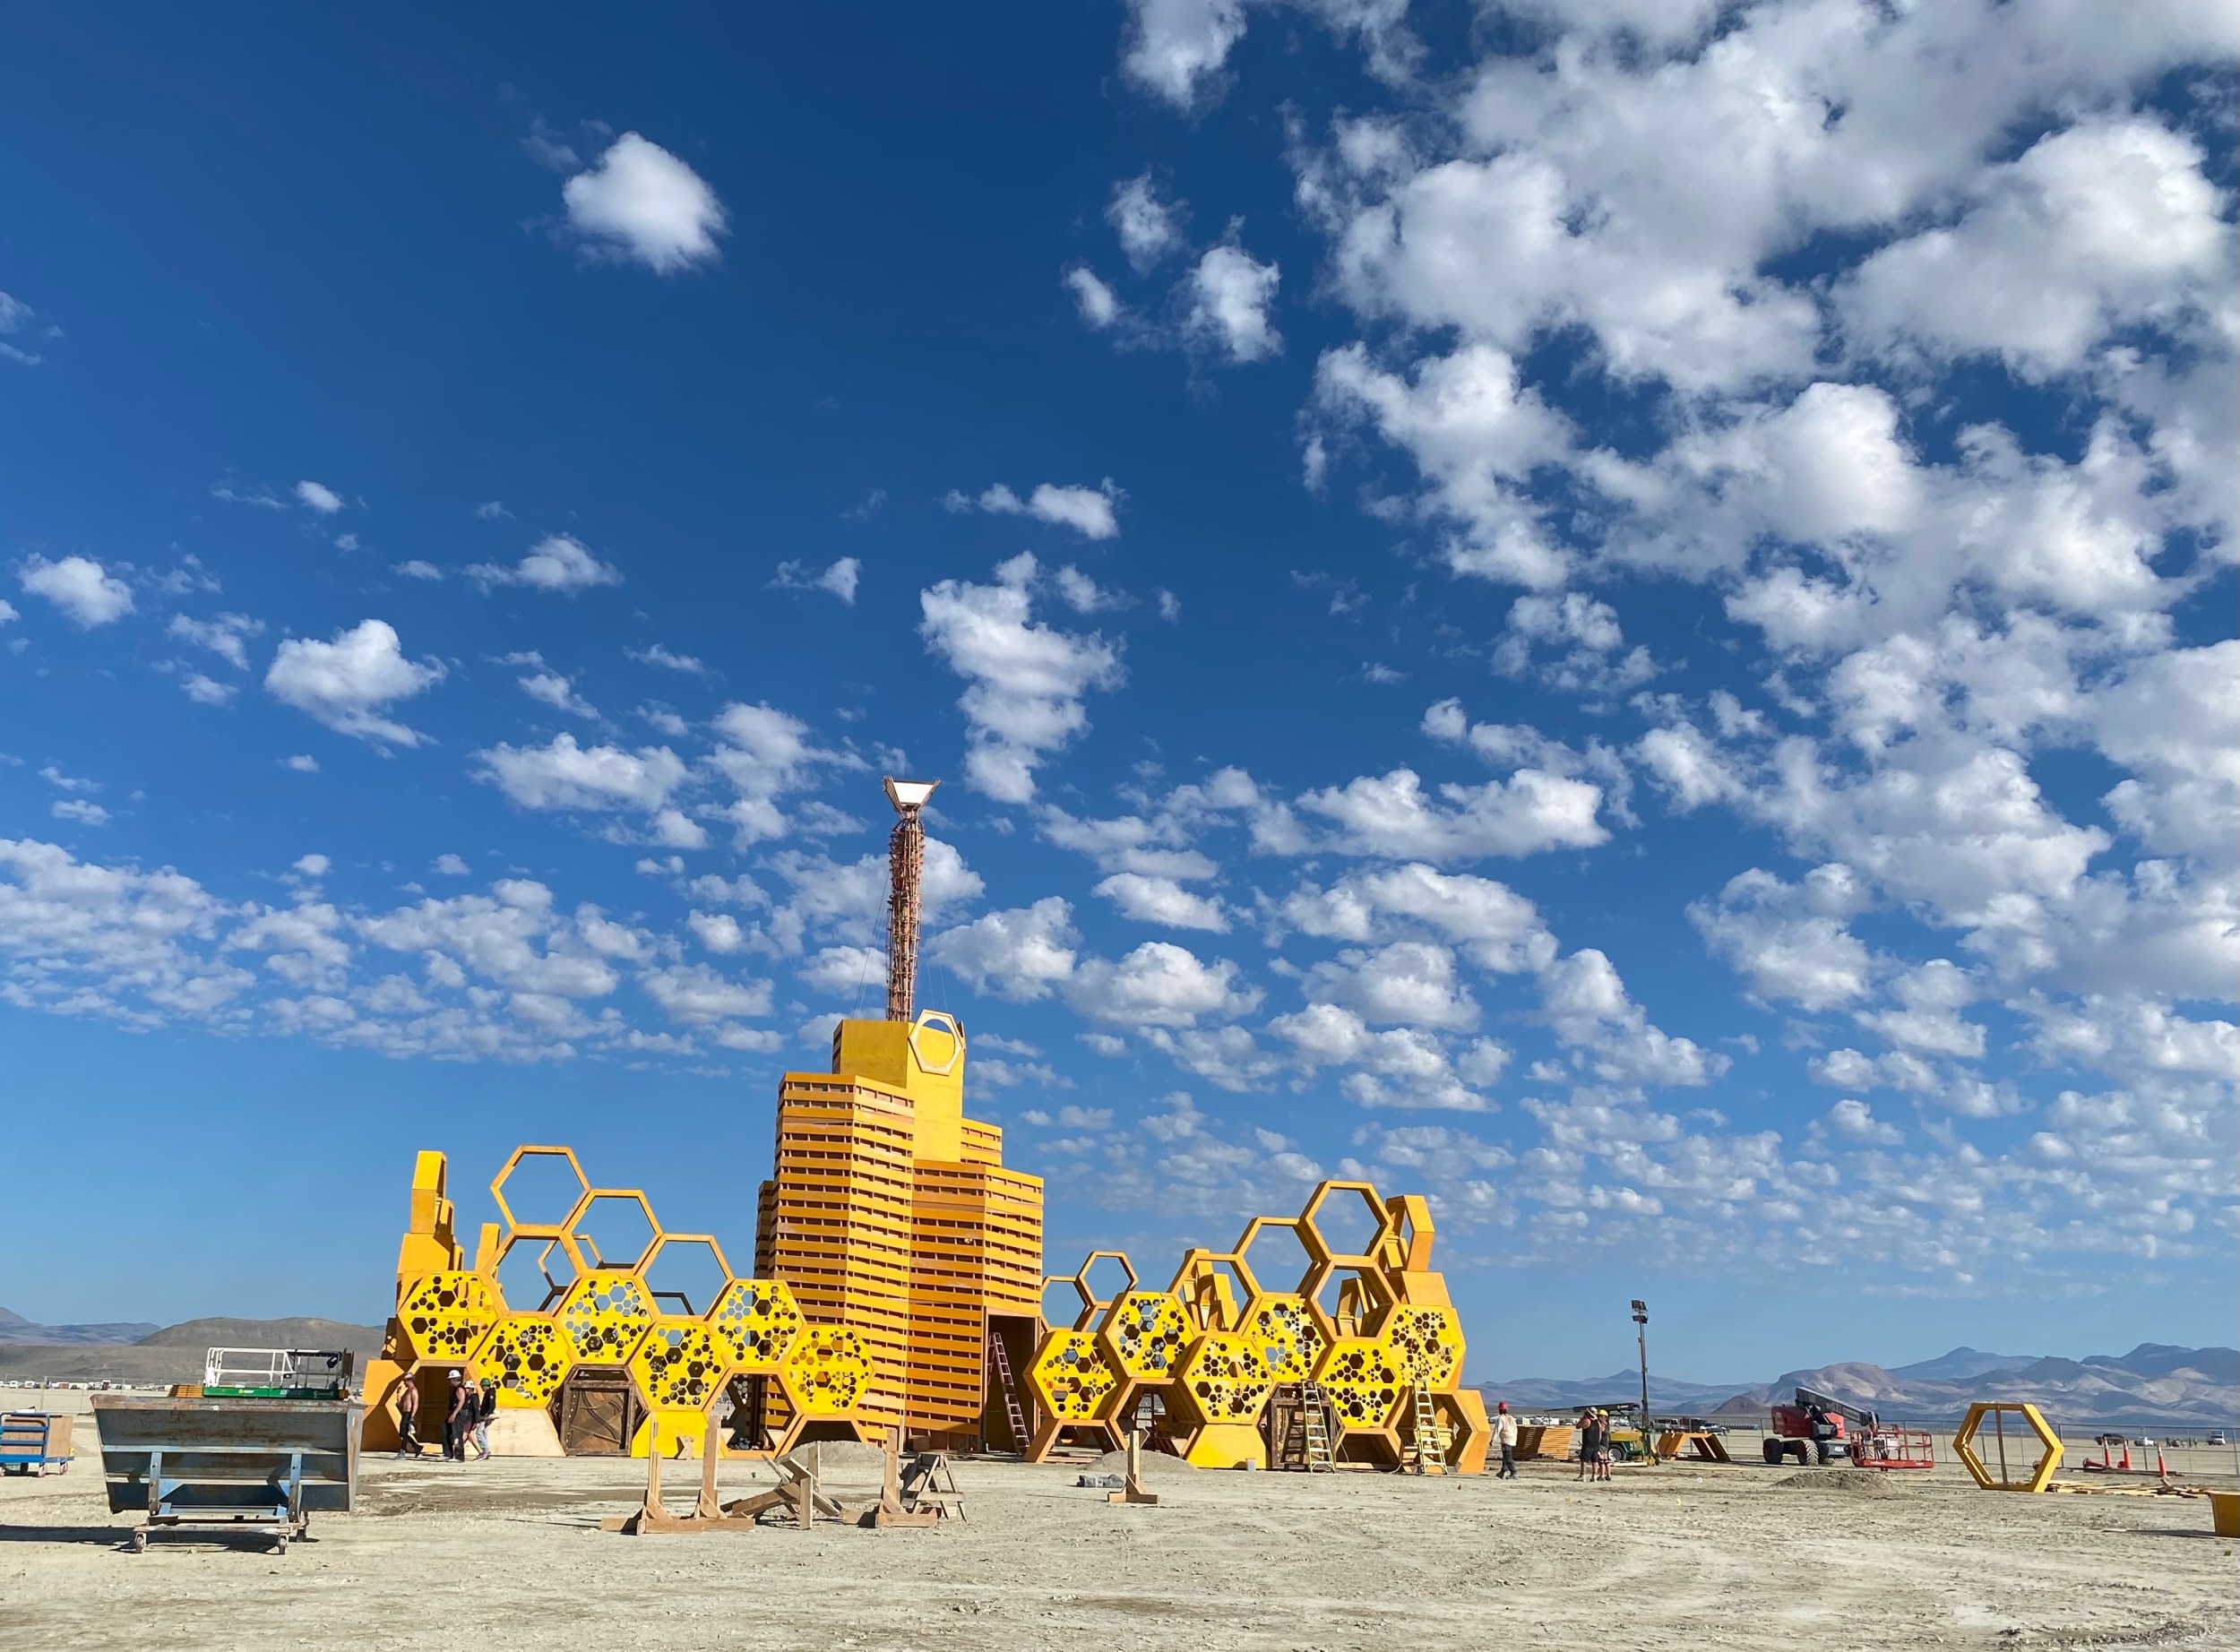 Honeycomb structures surround the base of &quot;The Hive&quot; at Burning Man 2023 in the Nevada desert.